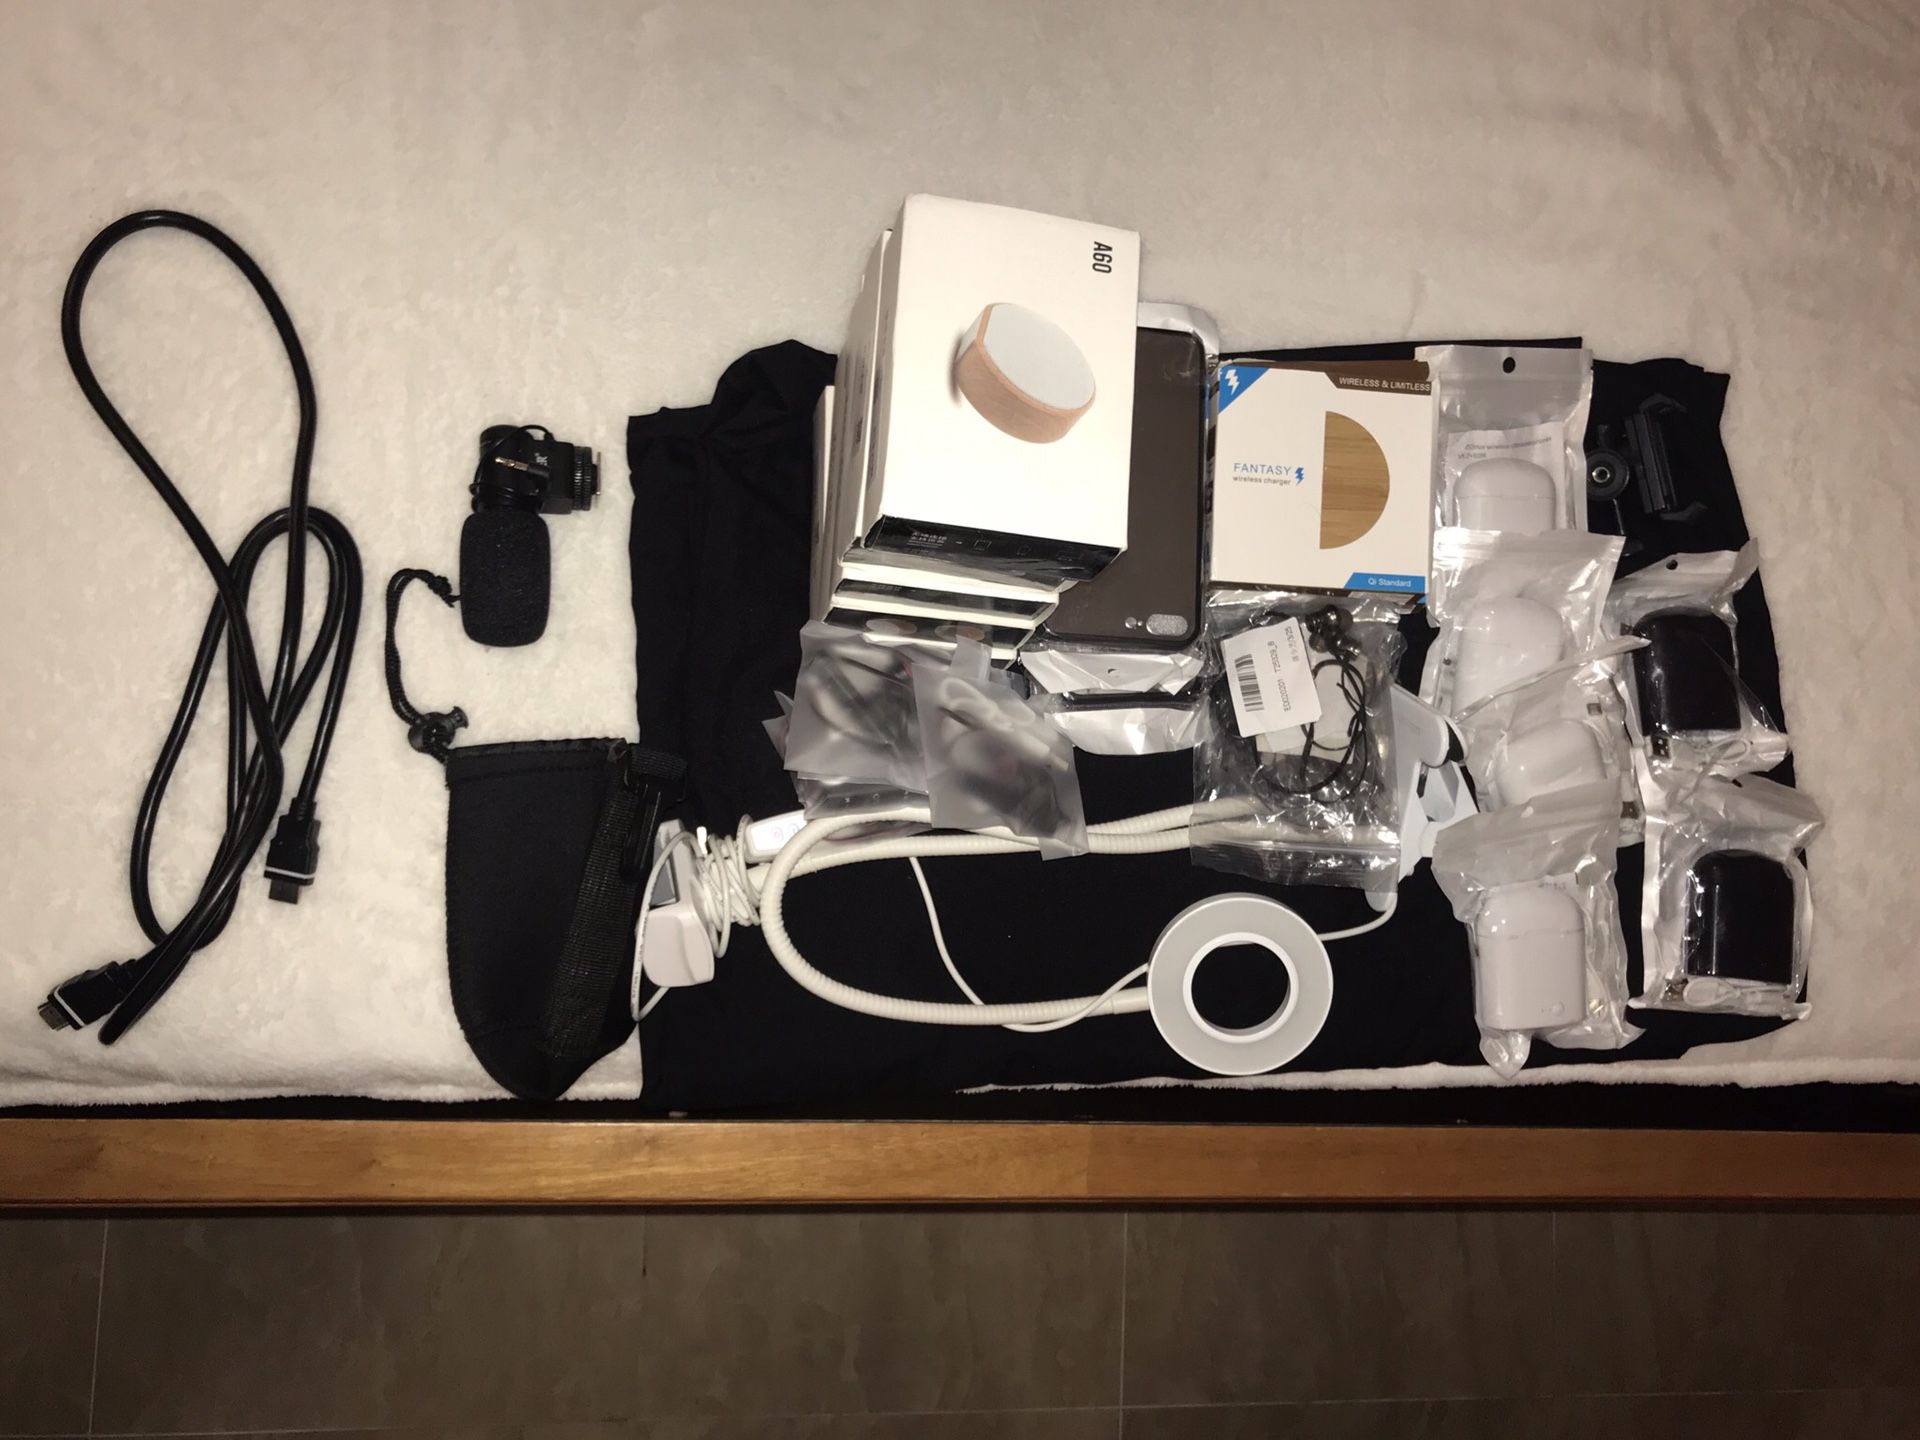 Dropshippers Bundle - leftover inventory including Generic AirPods and Bluetooth Speakers/Headphones